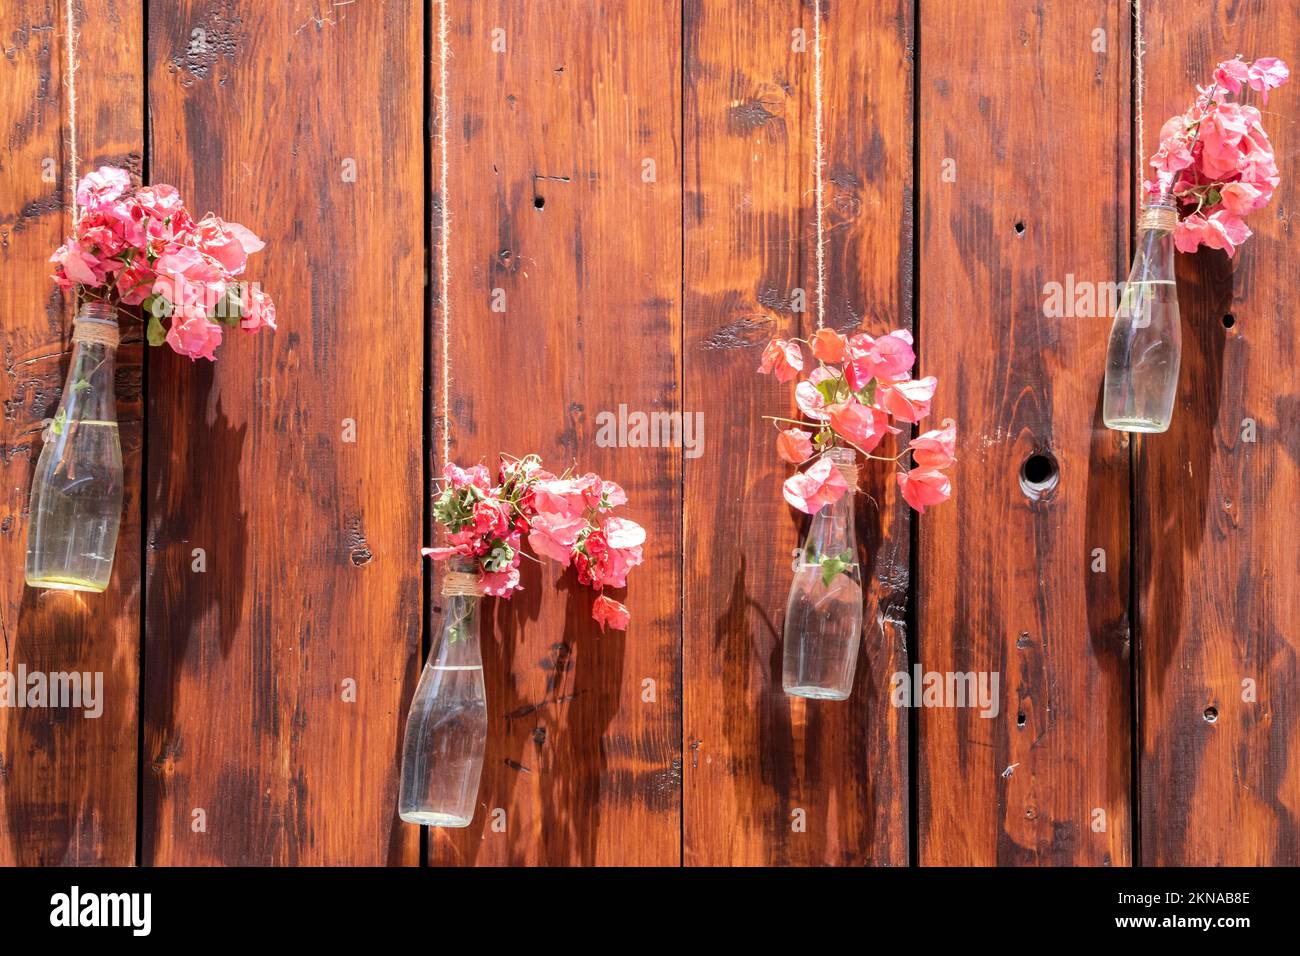 Glass bottles with flowers as decorative vases hanging on wooden garden fence Stock Photo